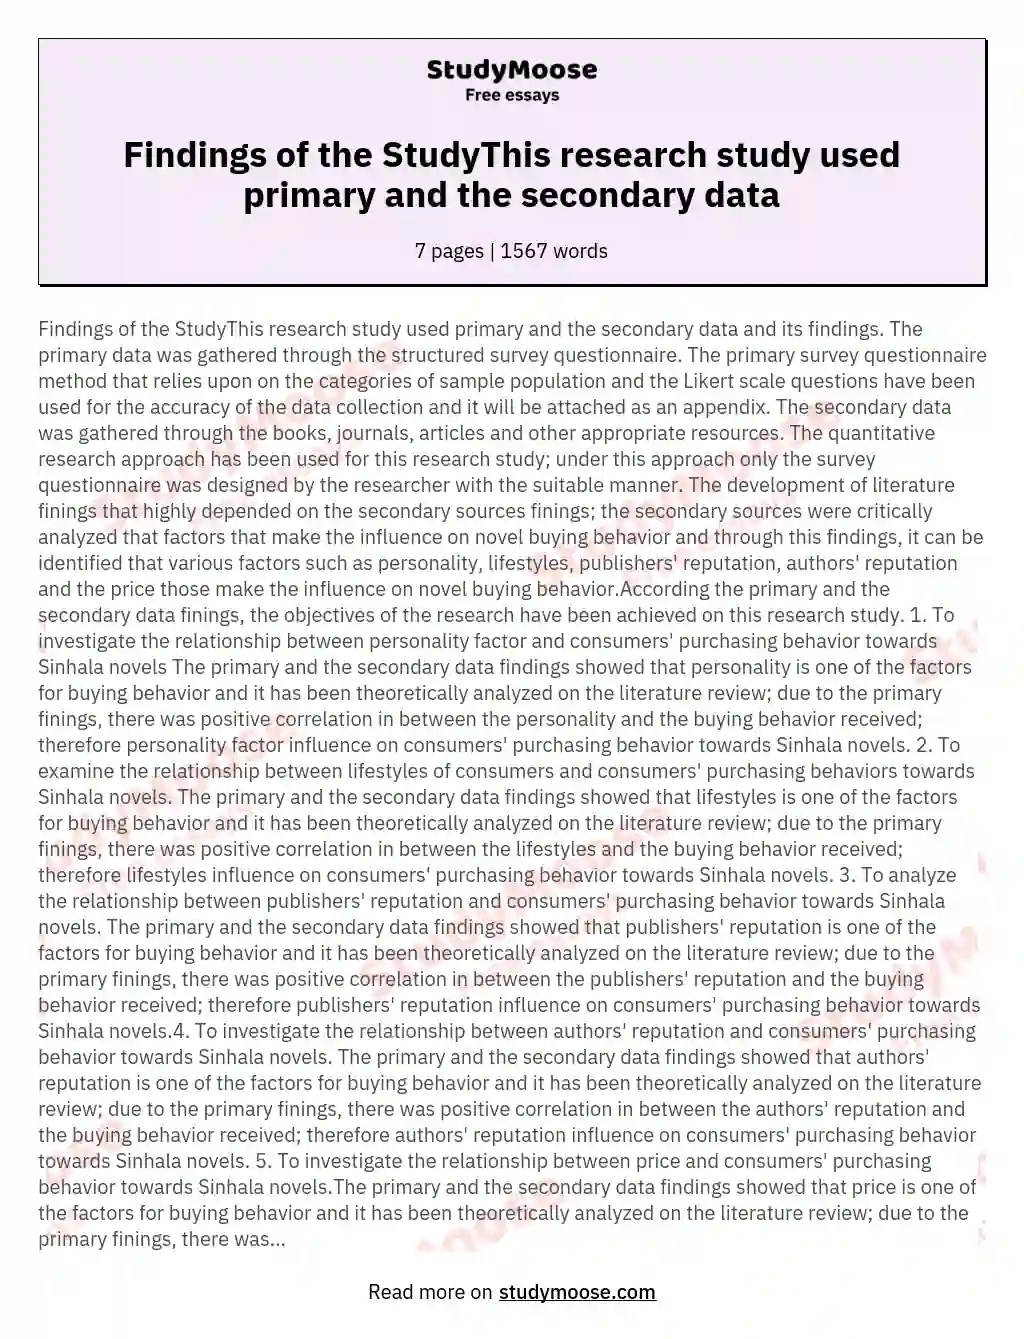 Findings of the StudyThis research study used primary and the secondary data essay